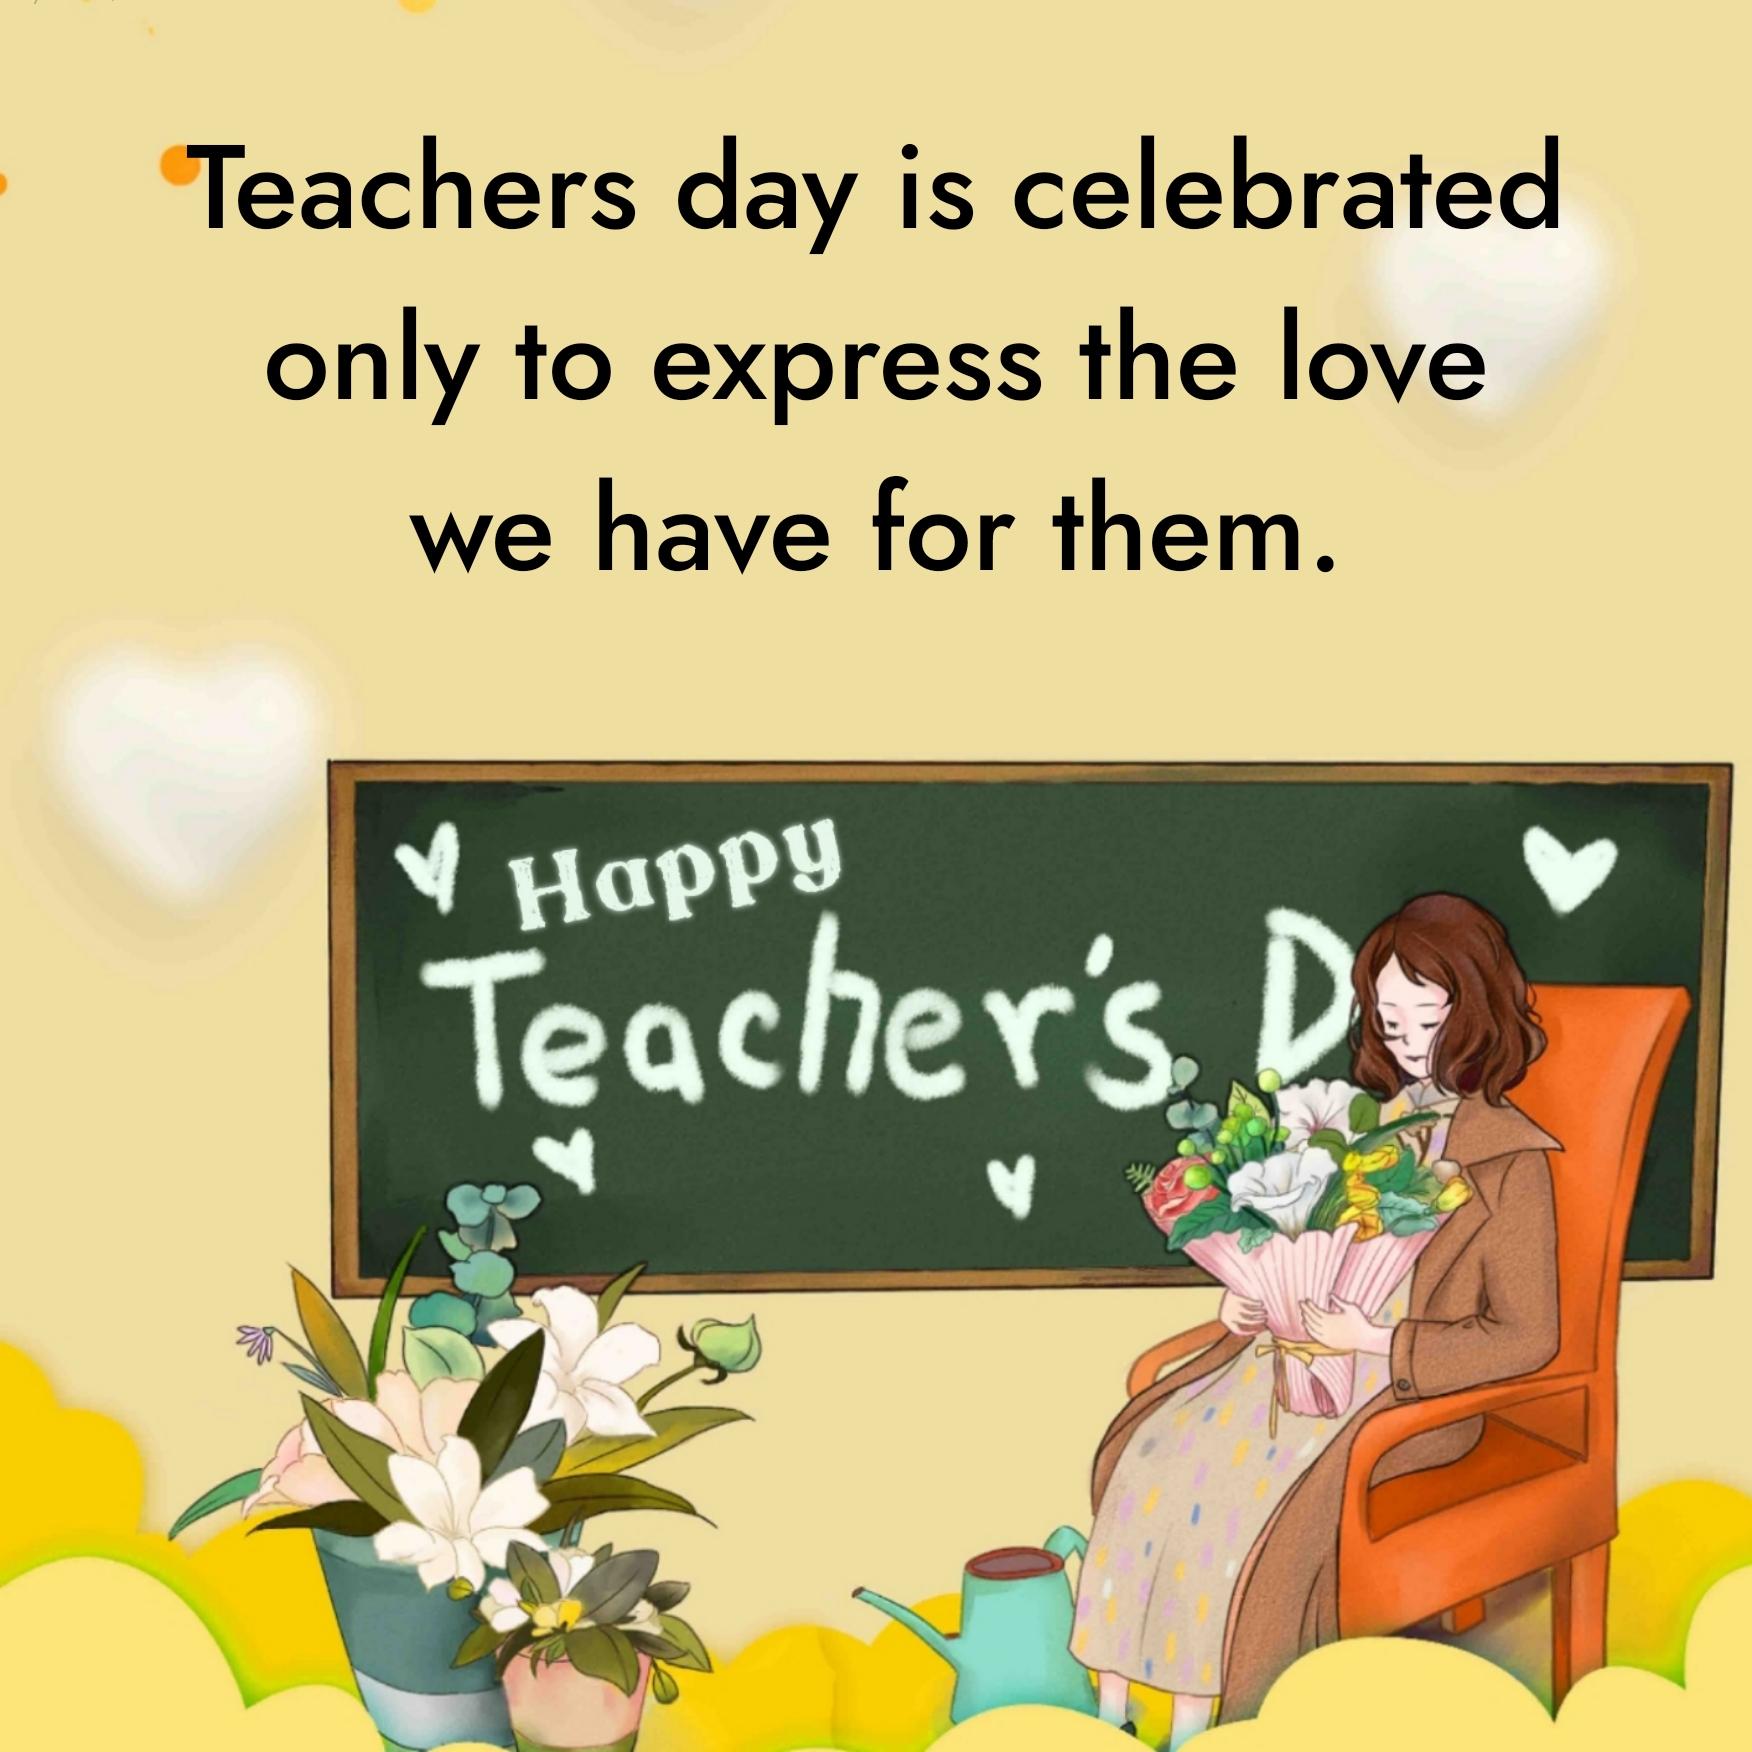 Teachers day is celebrated only to express the love